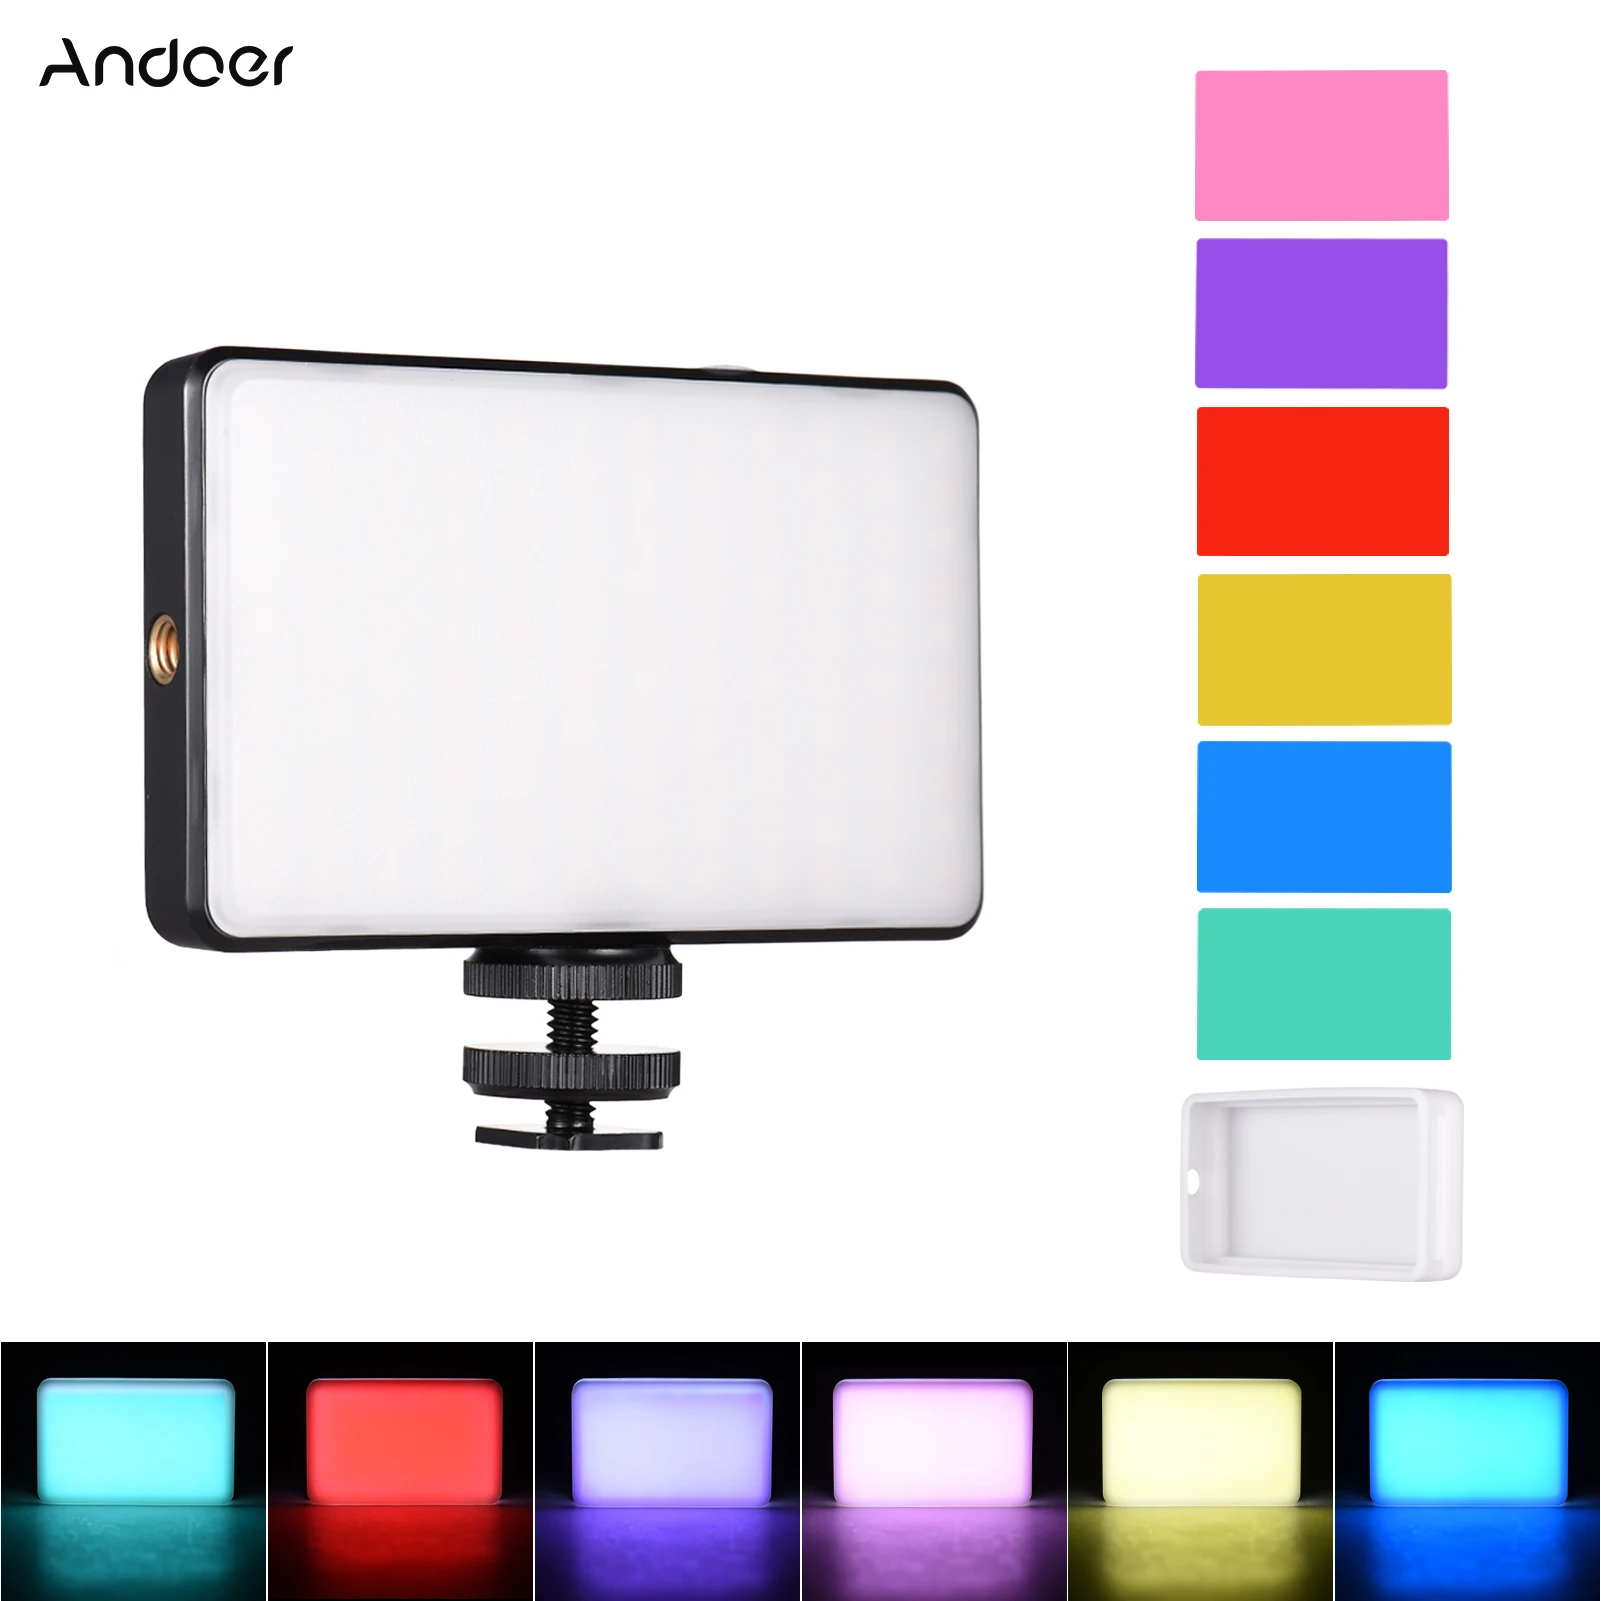 

Andoer ST120 Pocket LED Video Light Rechargeable Fill Light 2500K-9000K Bi-color Temperature Dimmable CRI95+ w/ Silicon Diffuser